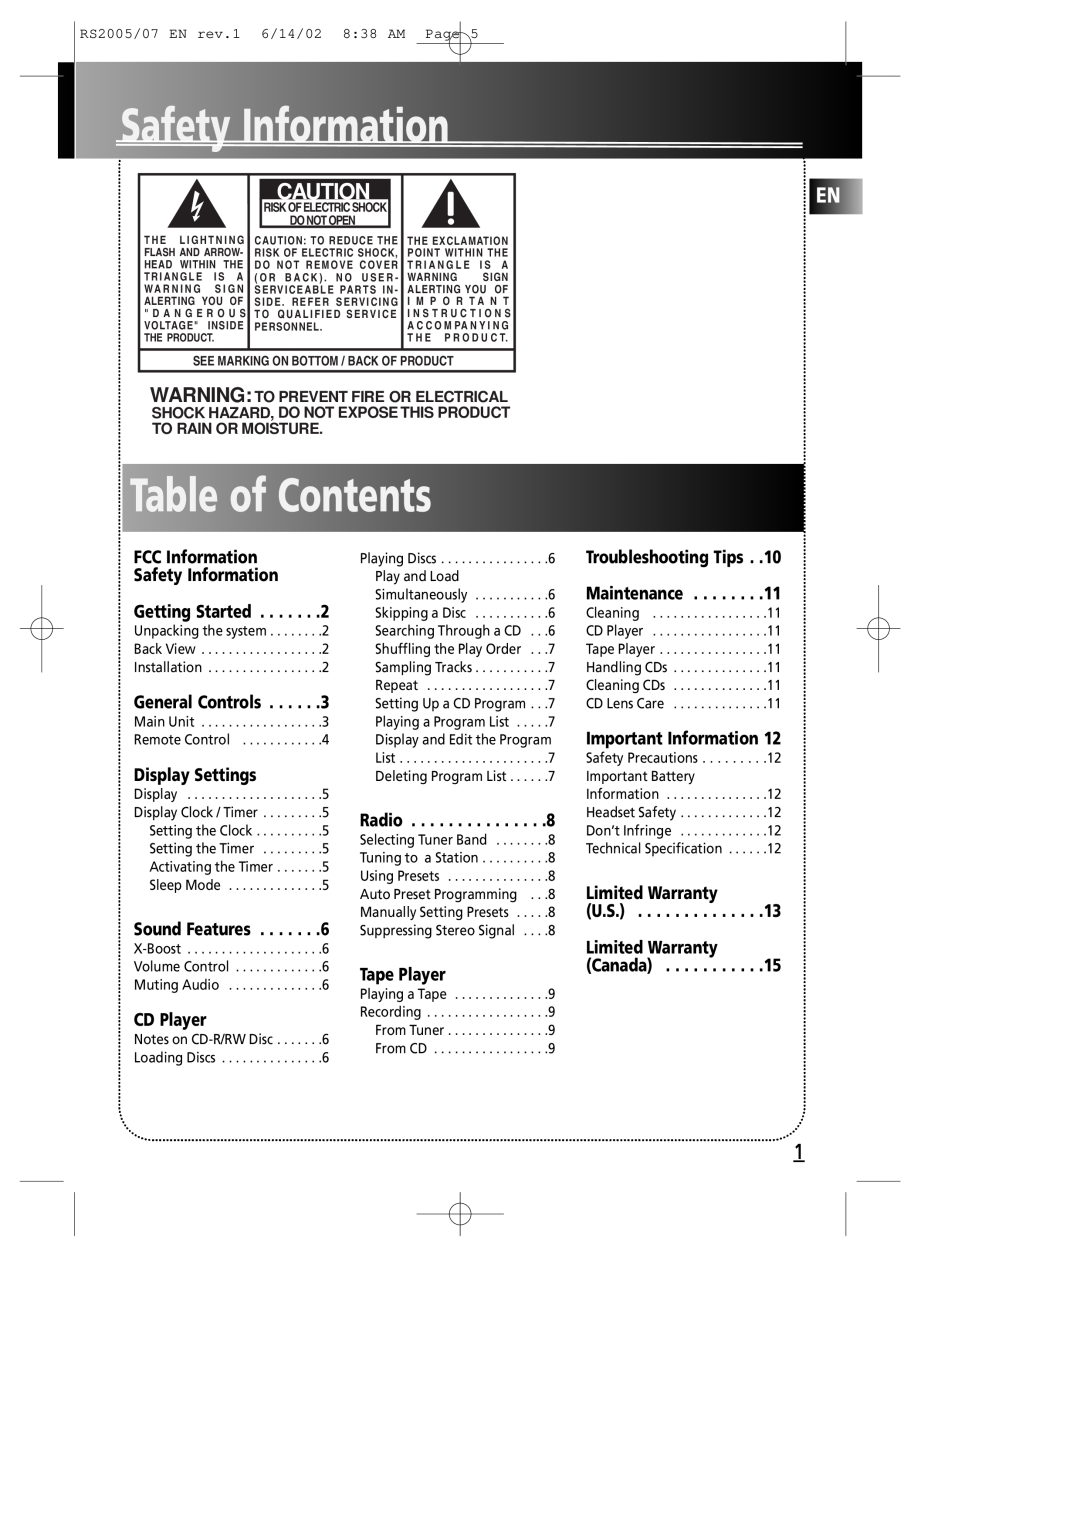 RCA RS2005 manual Safety Information, Table of Contents 